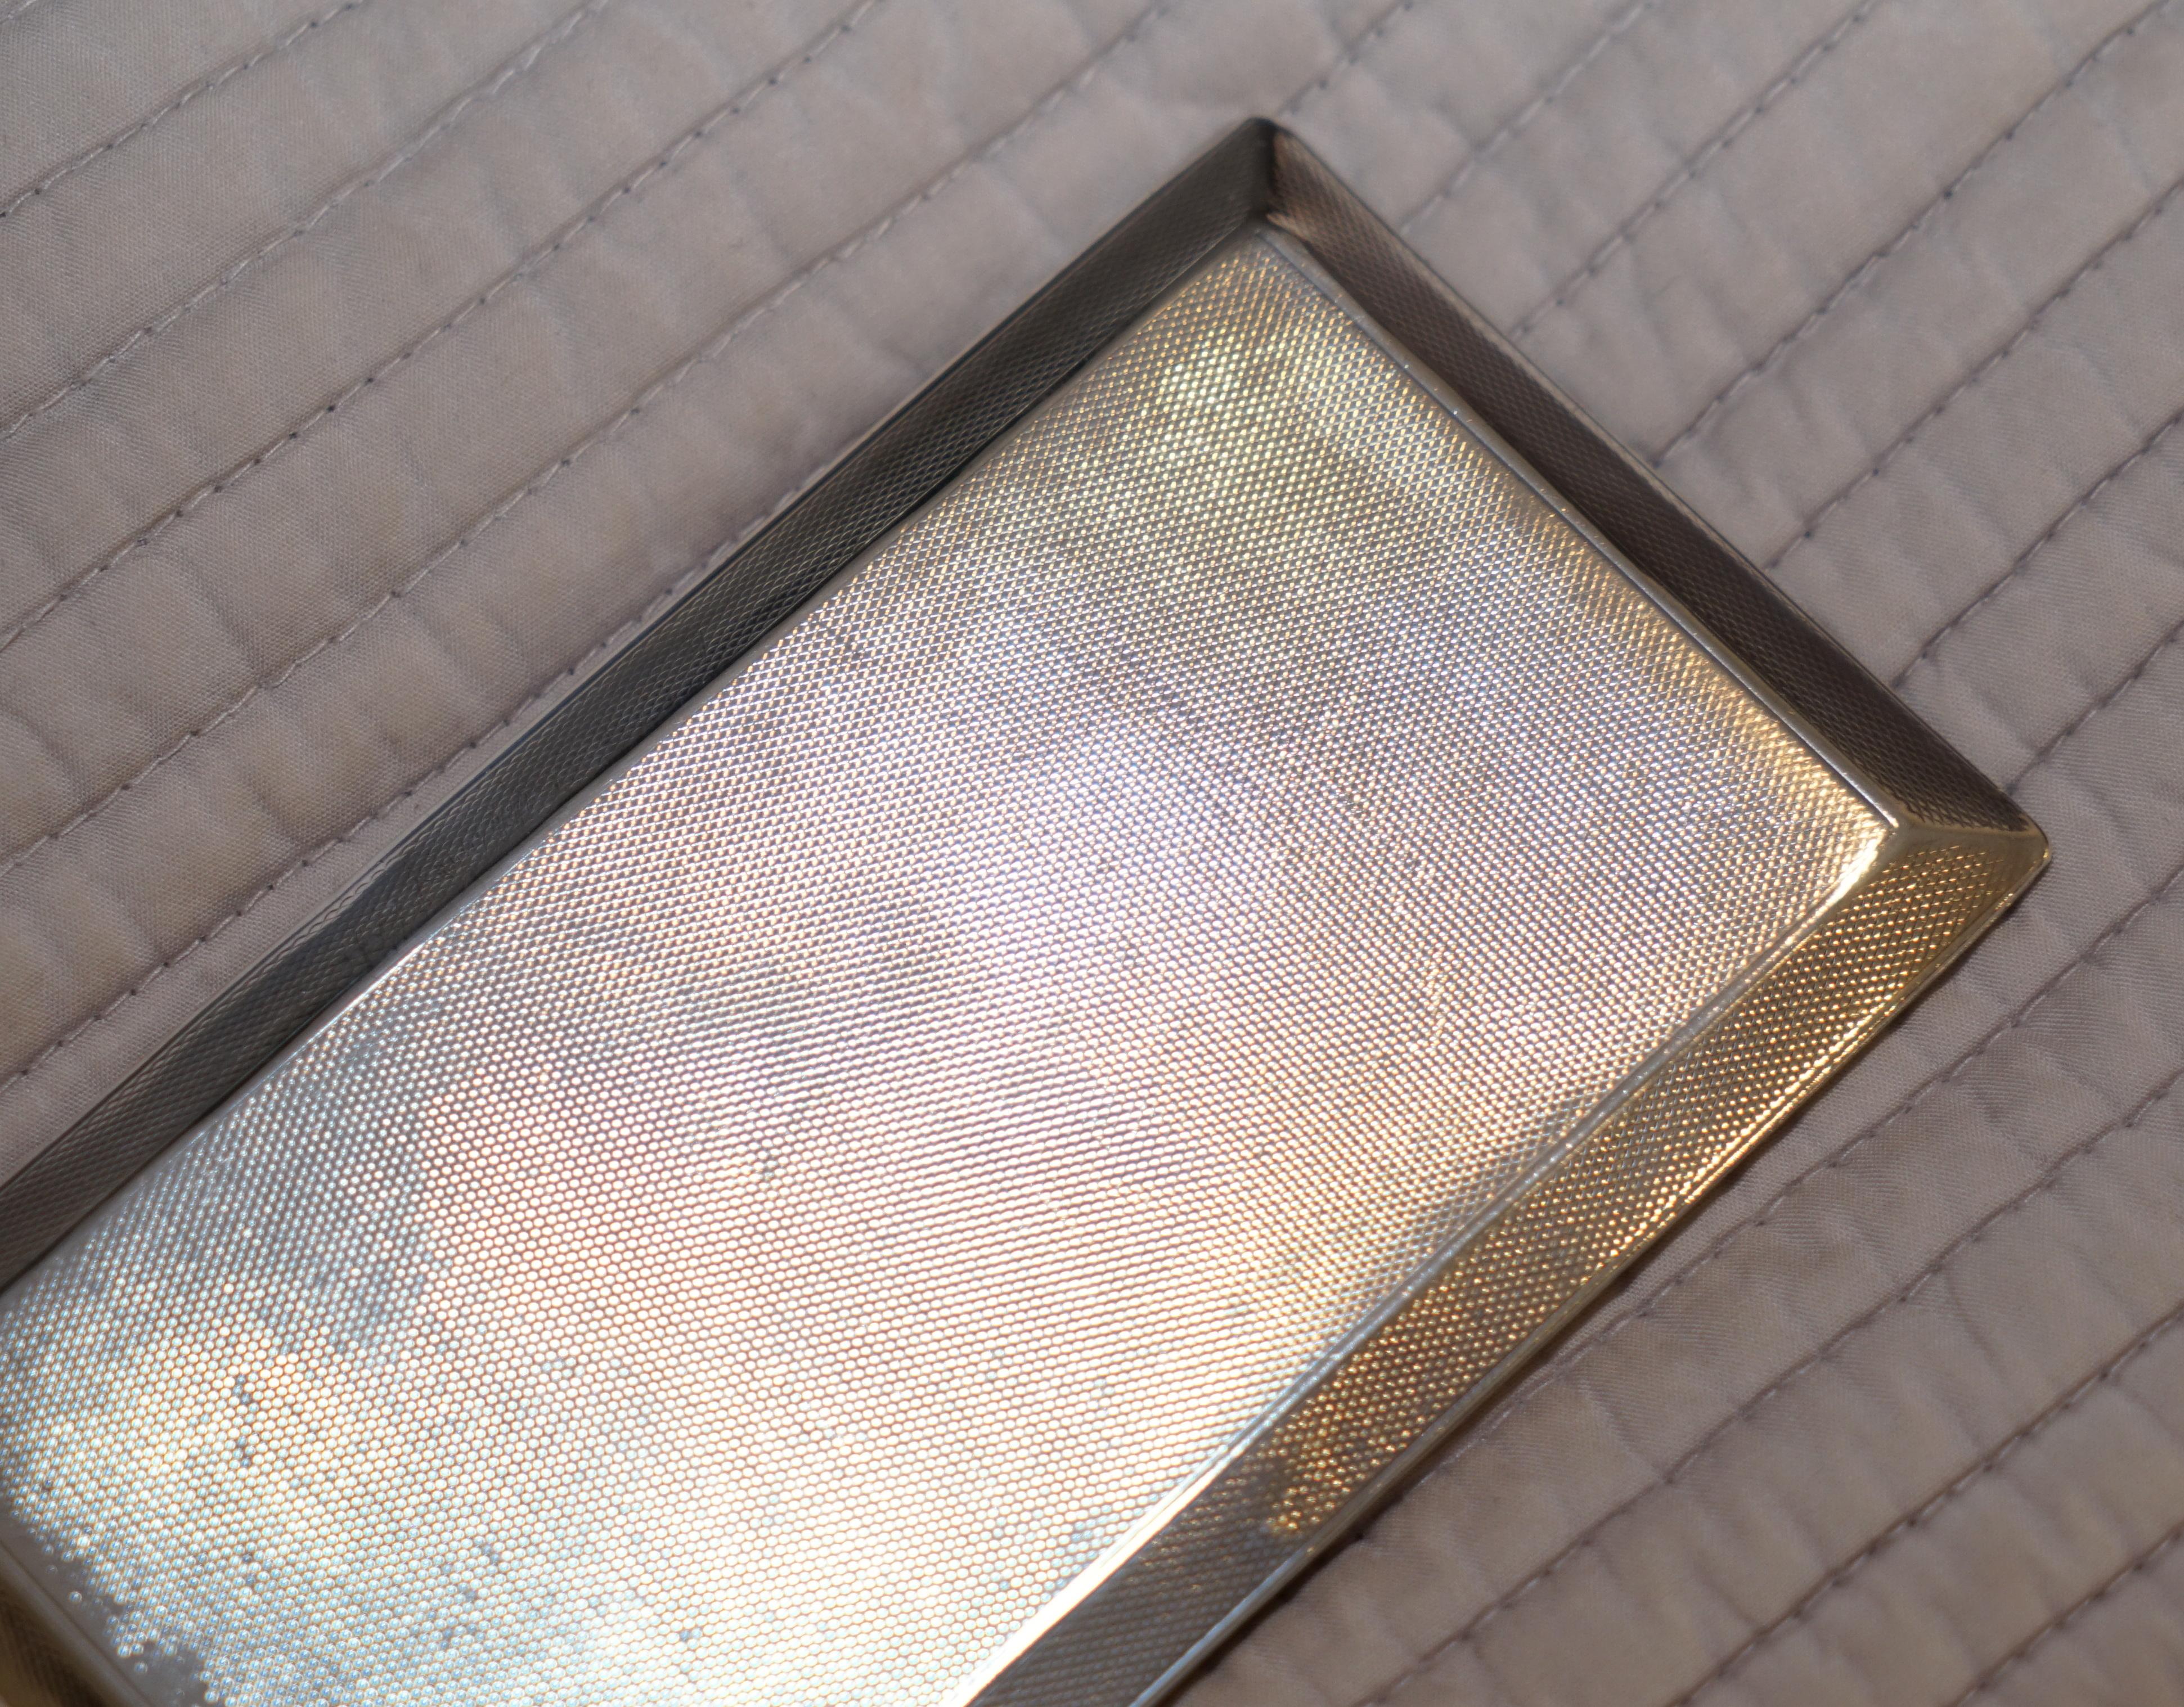 Hand-Crafted Solid Sterling Silver and Gold Gilt Asprey 1921 Cigarette Case with Belgium Flag